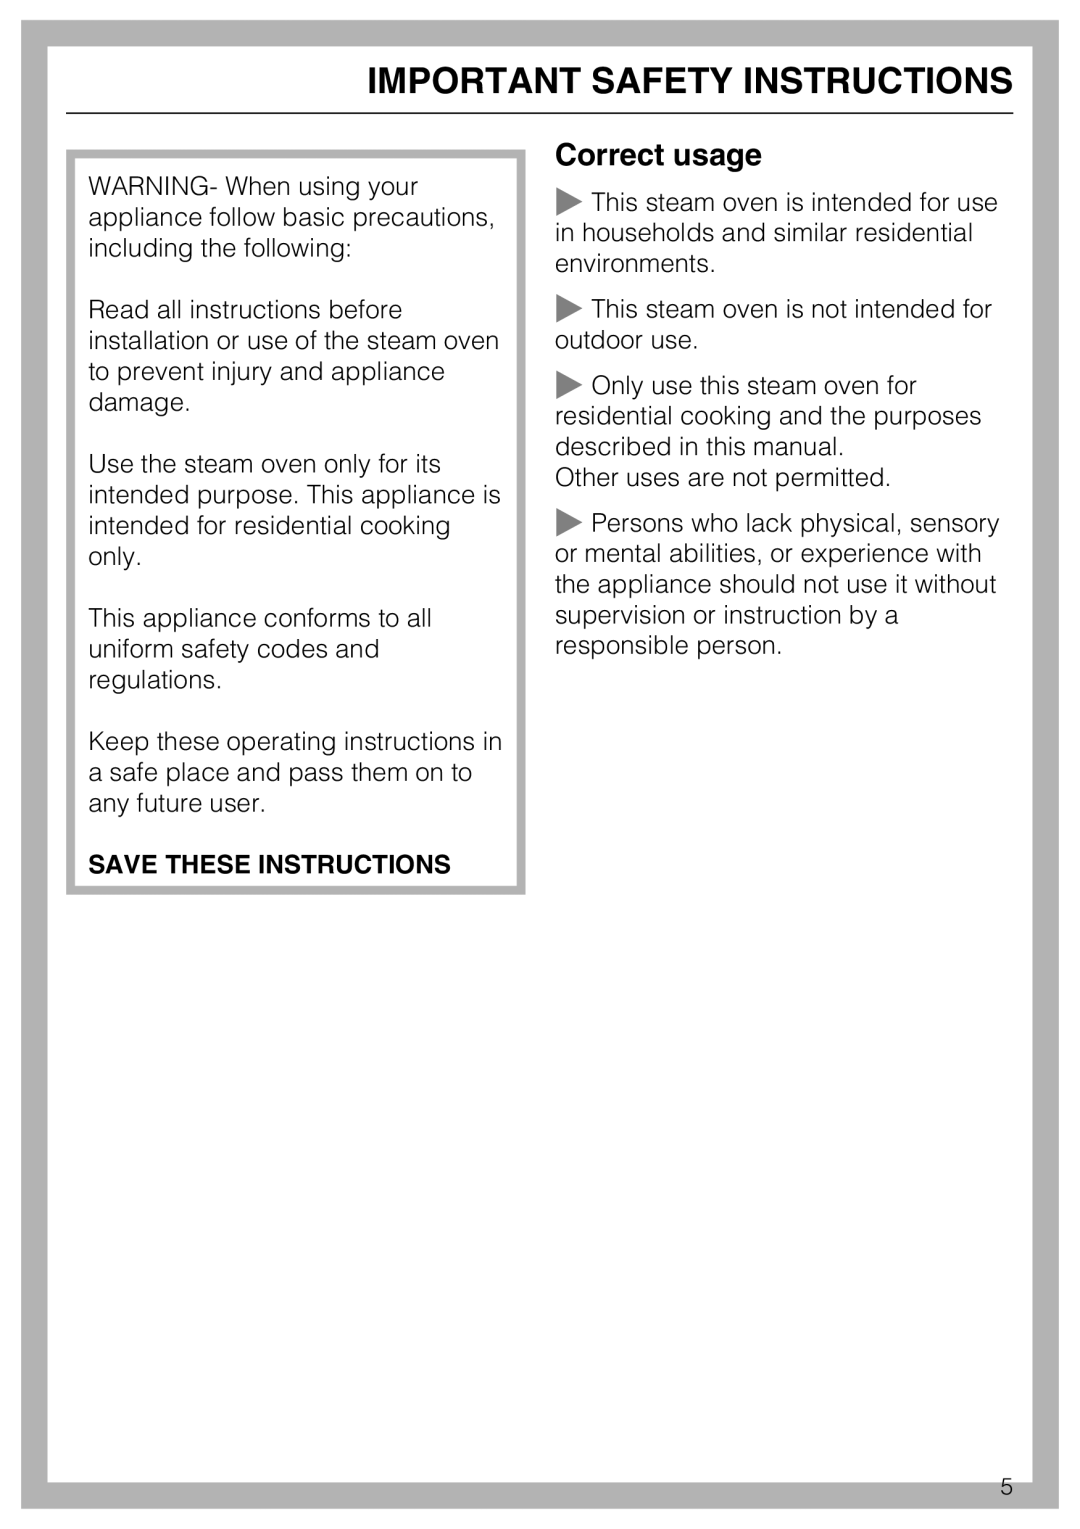 Miele 09 800 830 installation instructions Important Safety Instructions, Correct usage 